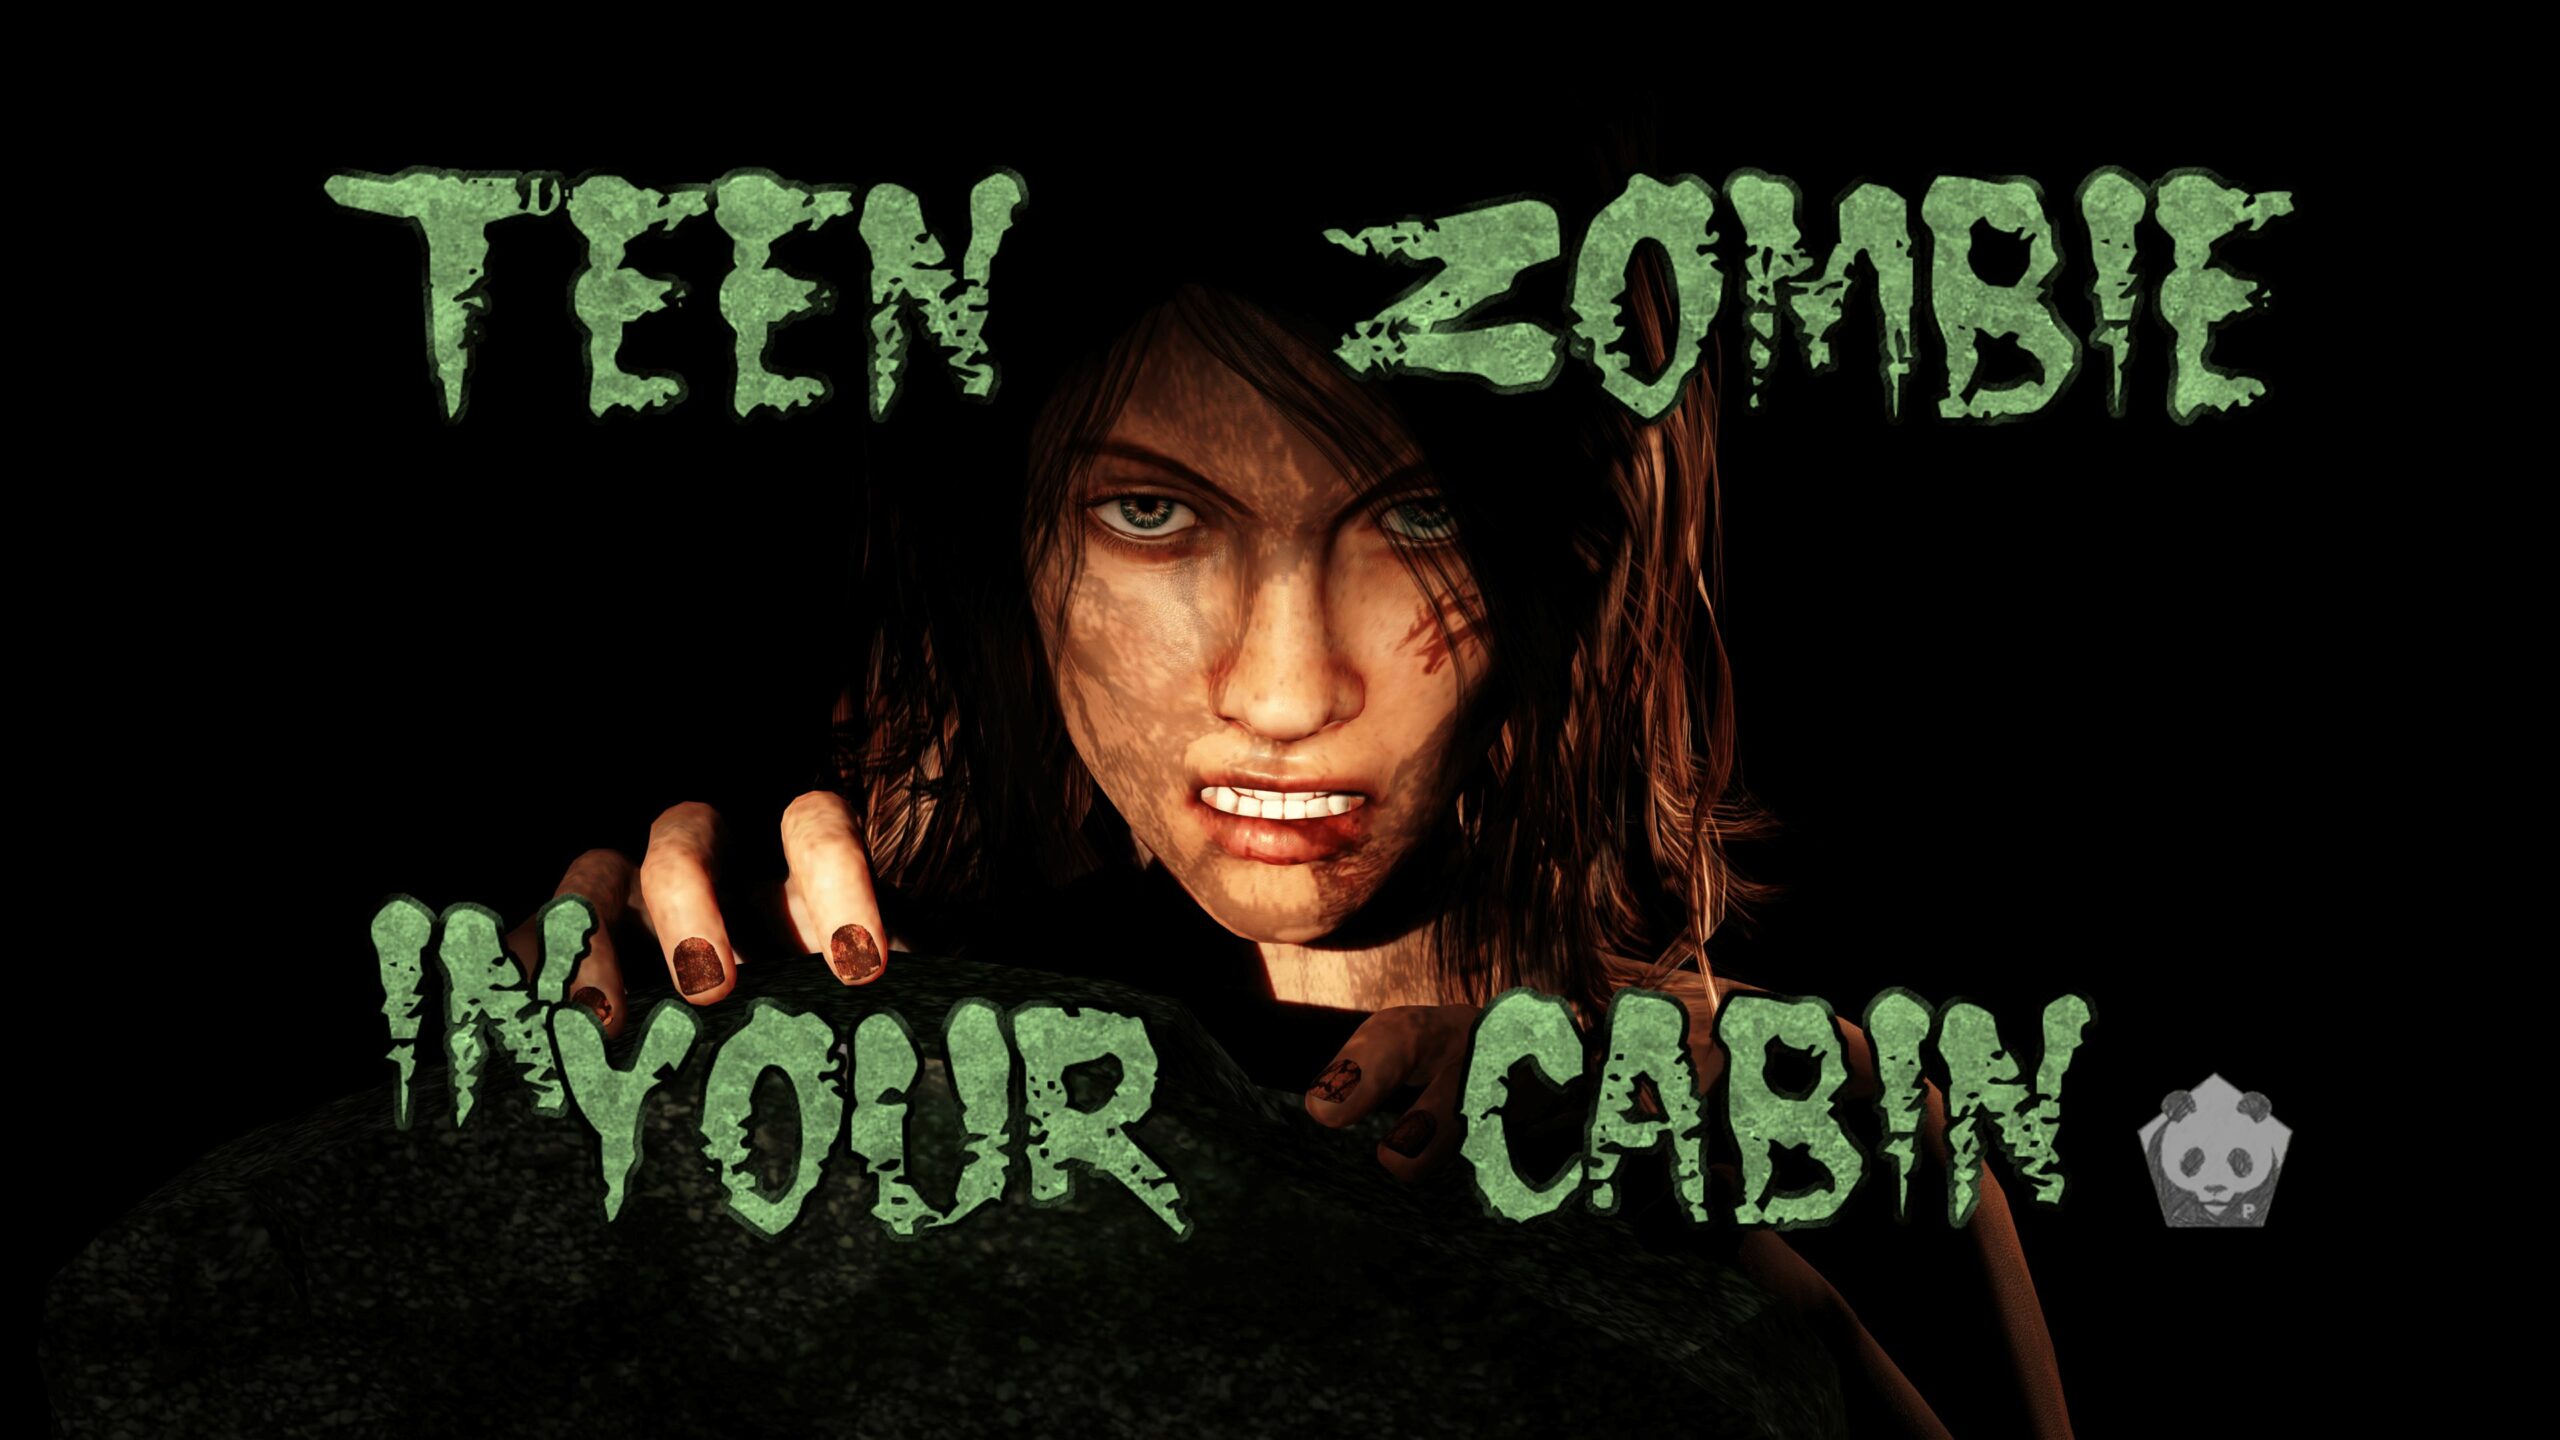 Teen Zombie in Your Cabin [Finished] - Version: 1.0